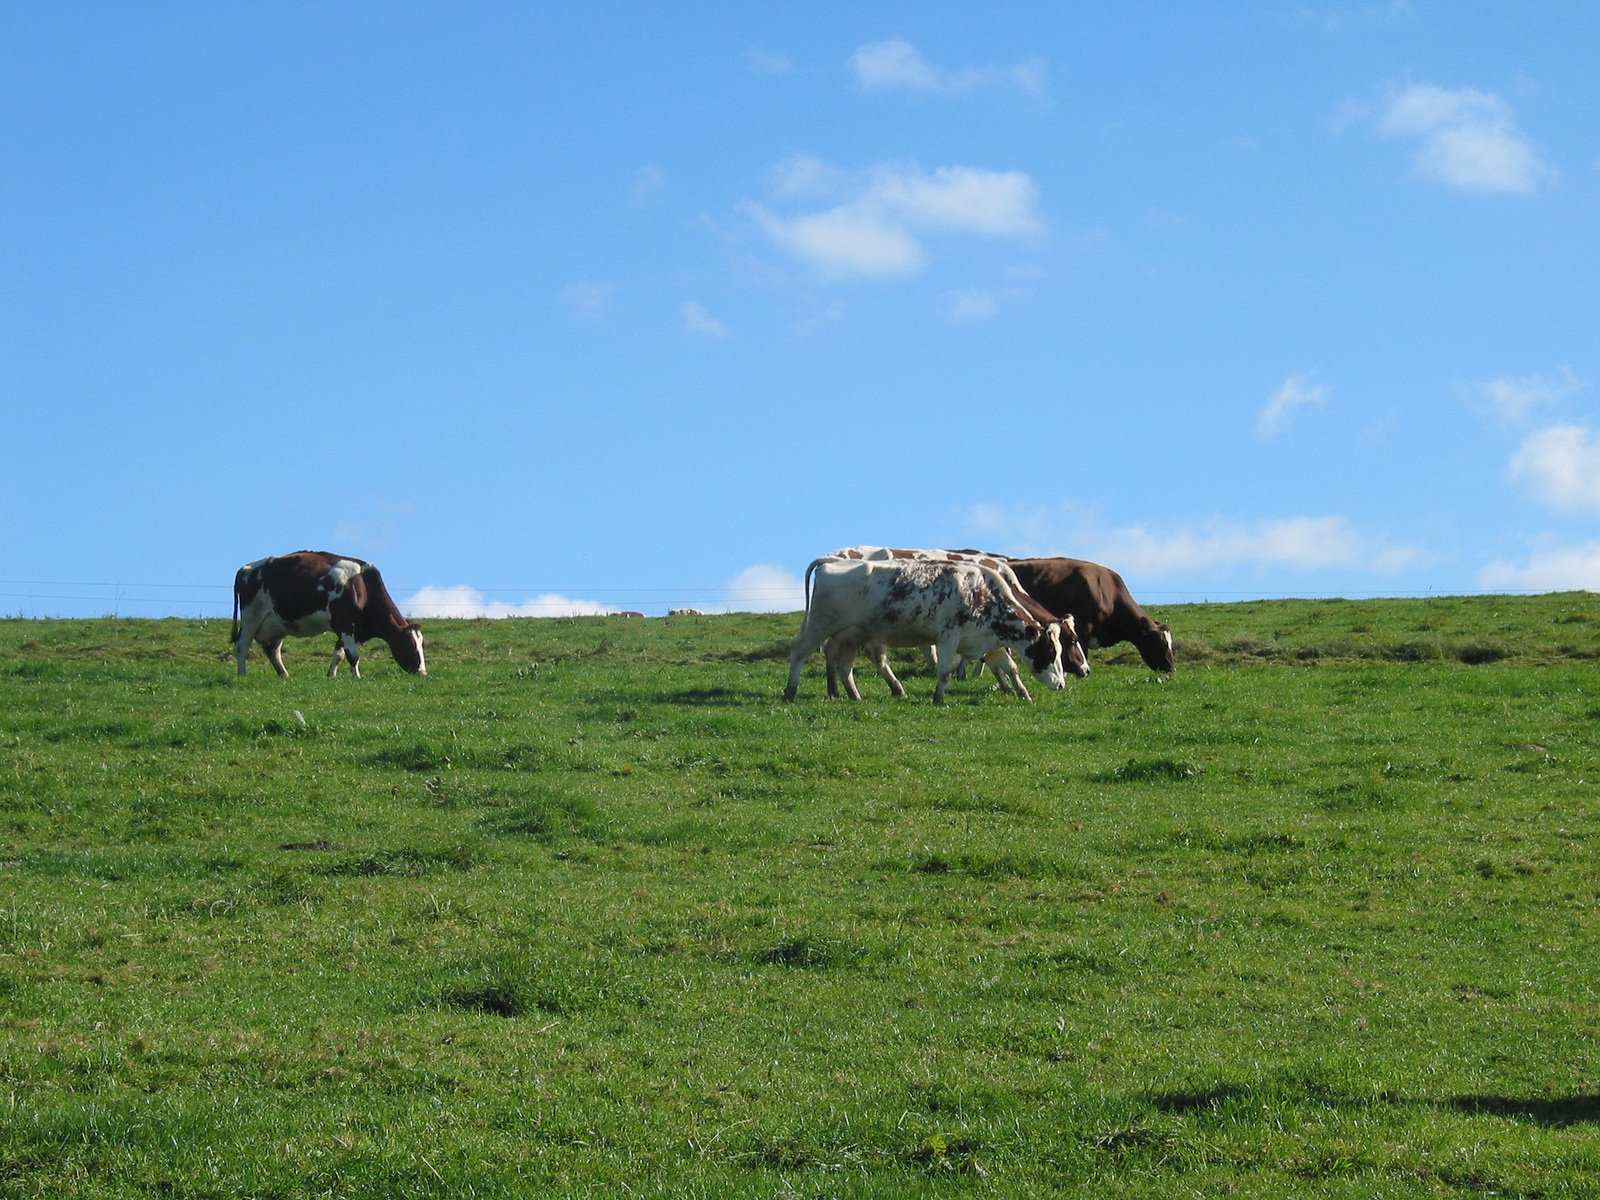 two cows eating grass in a large field